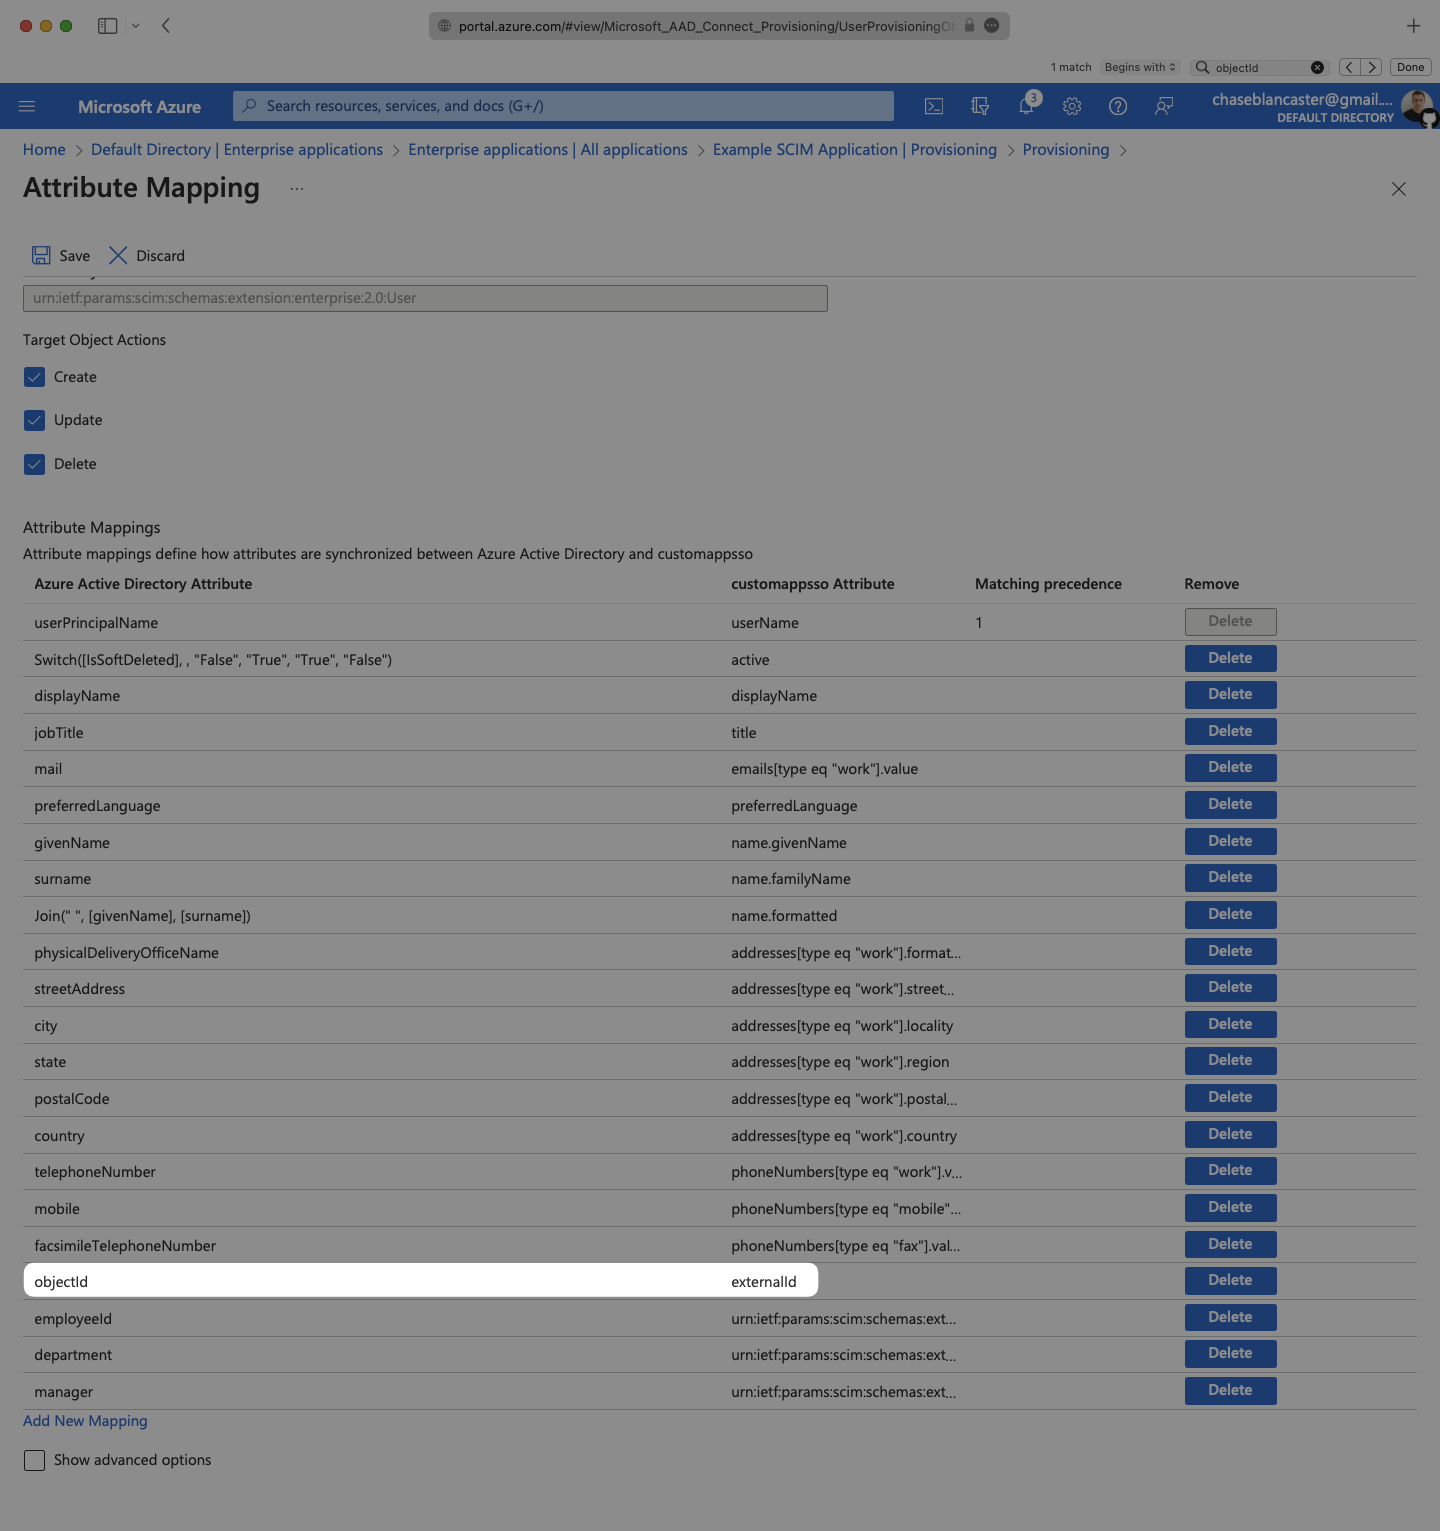 A screenshot showing where to ensure "objectId" is mapped to "externalId" in the Attribute Mapping section in Azure.